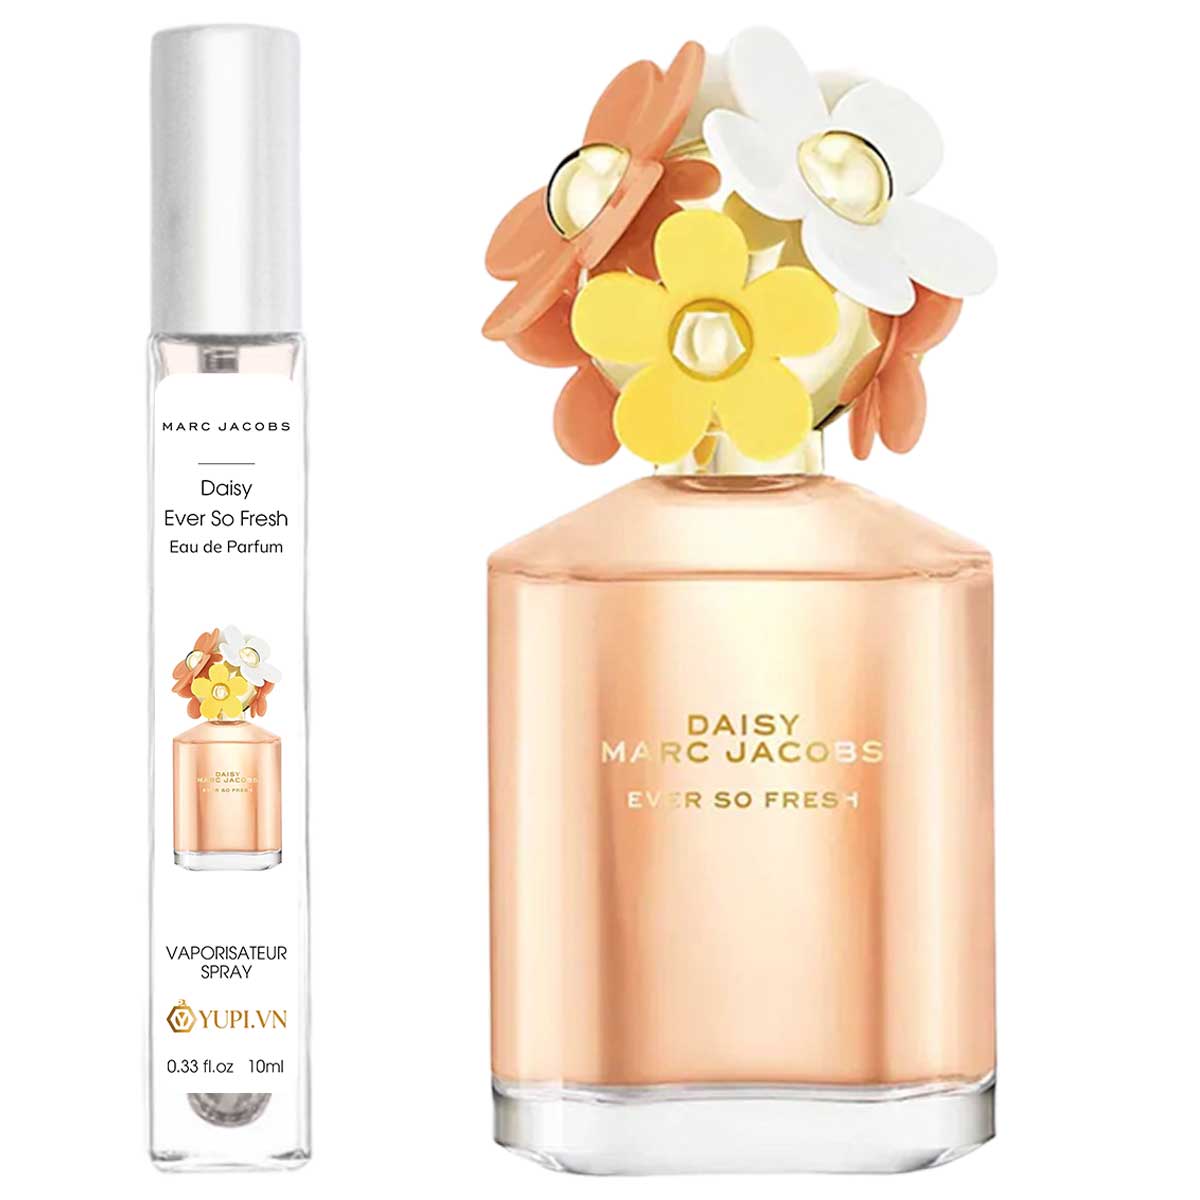 marc jacobs daisy ever so fresh chiet 10ml